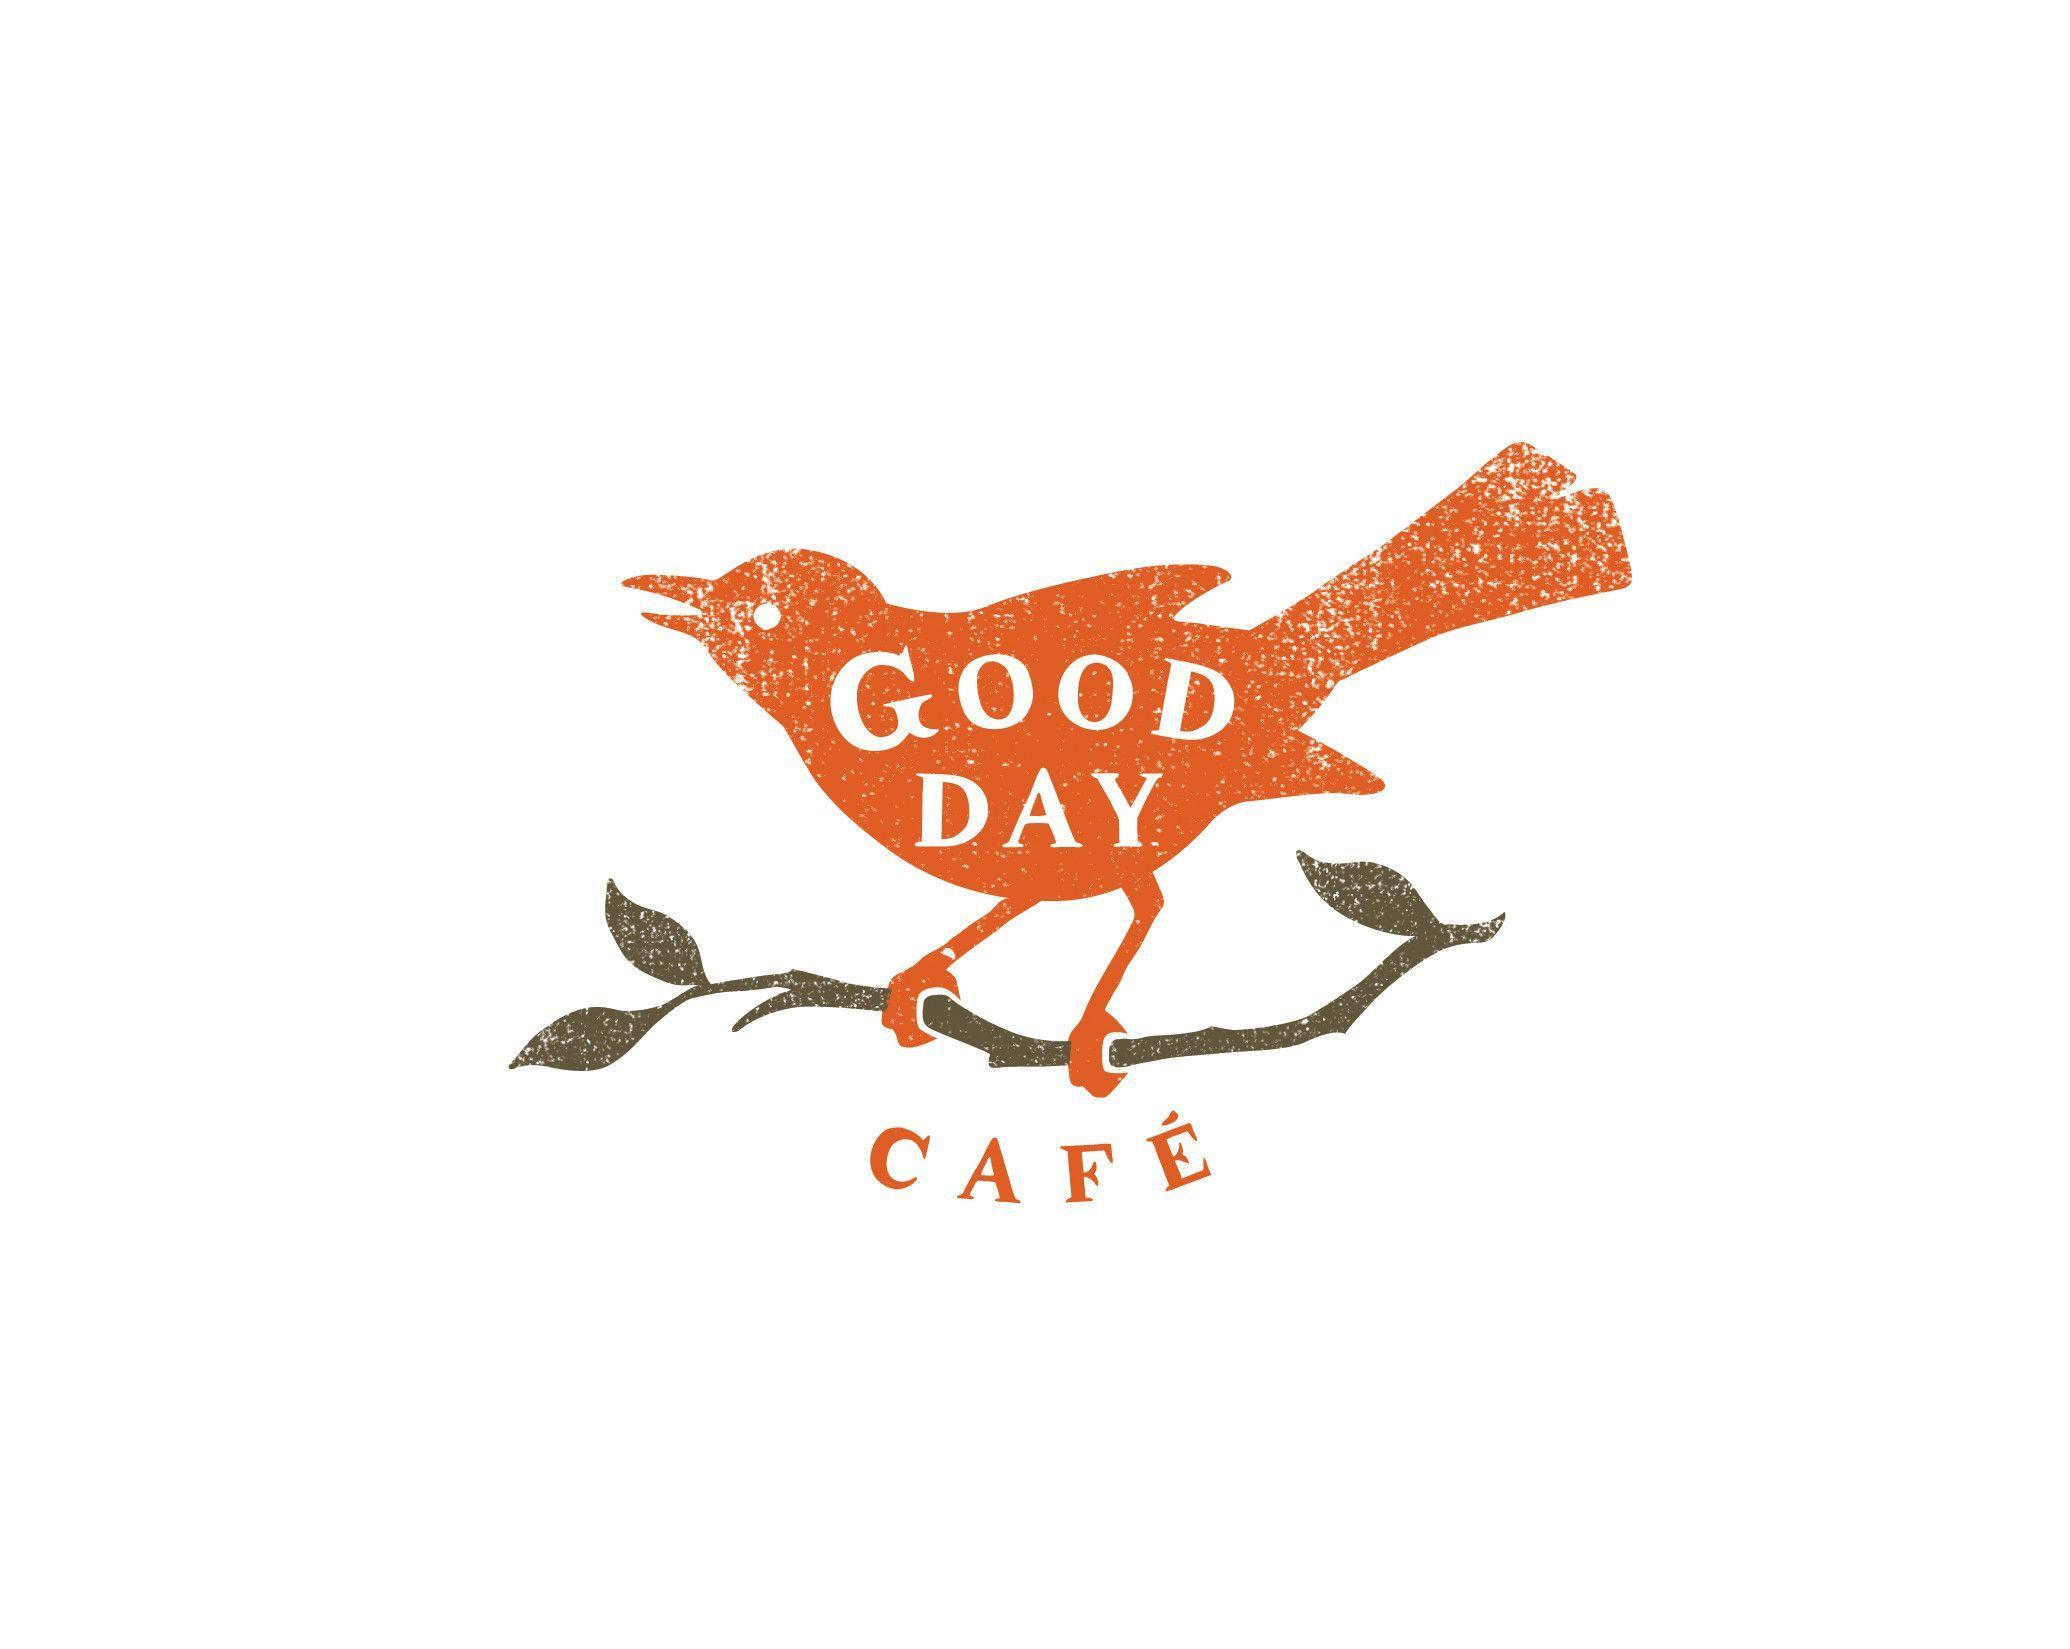 Cute Cafe Logo - This stamped logo just killed me, it's too cute!. Graphically Typed